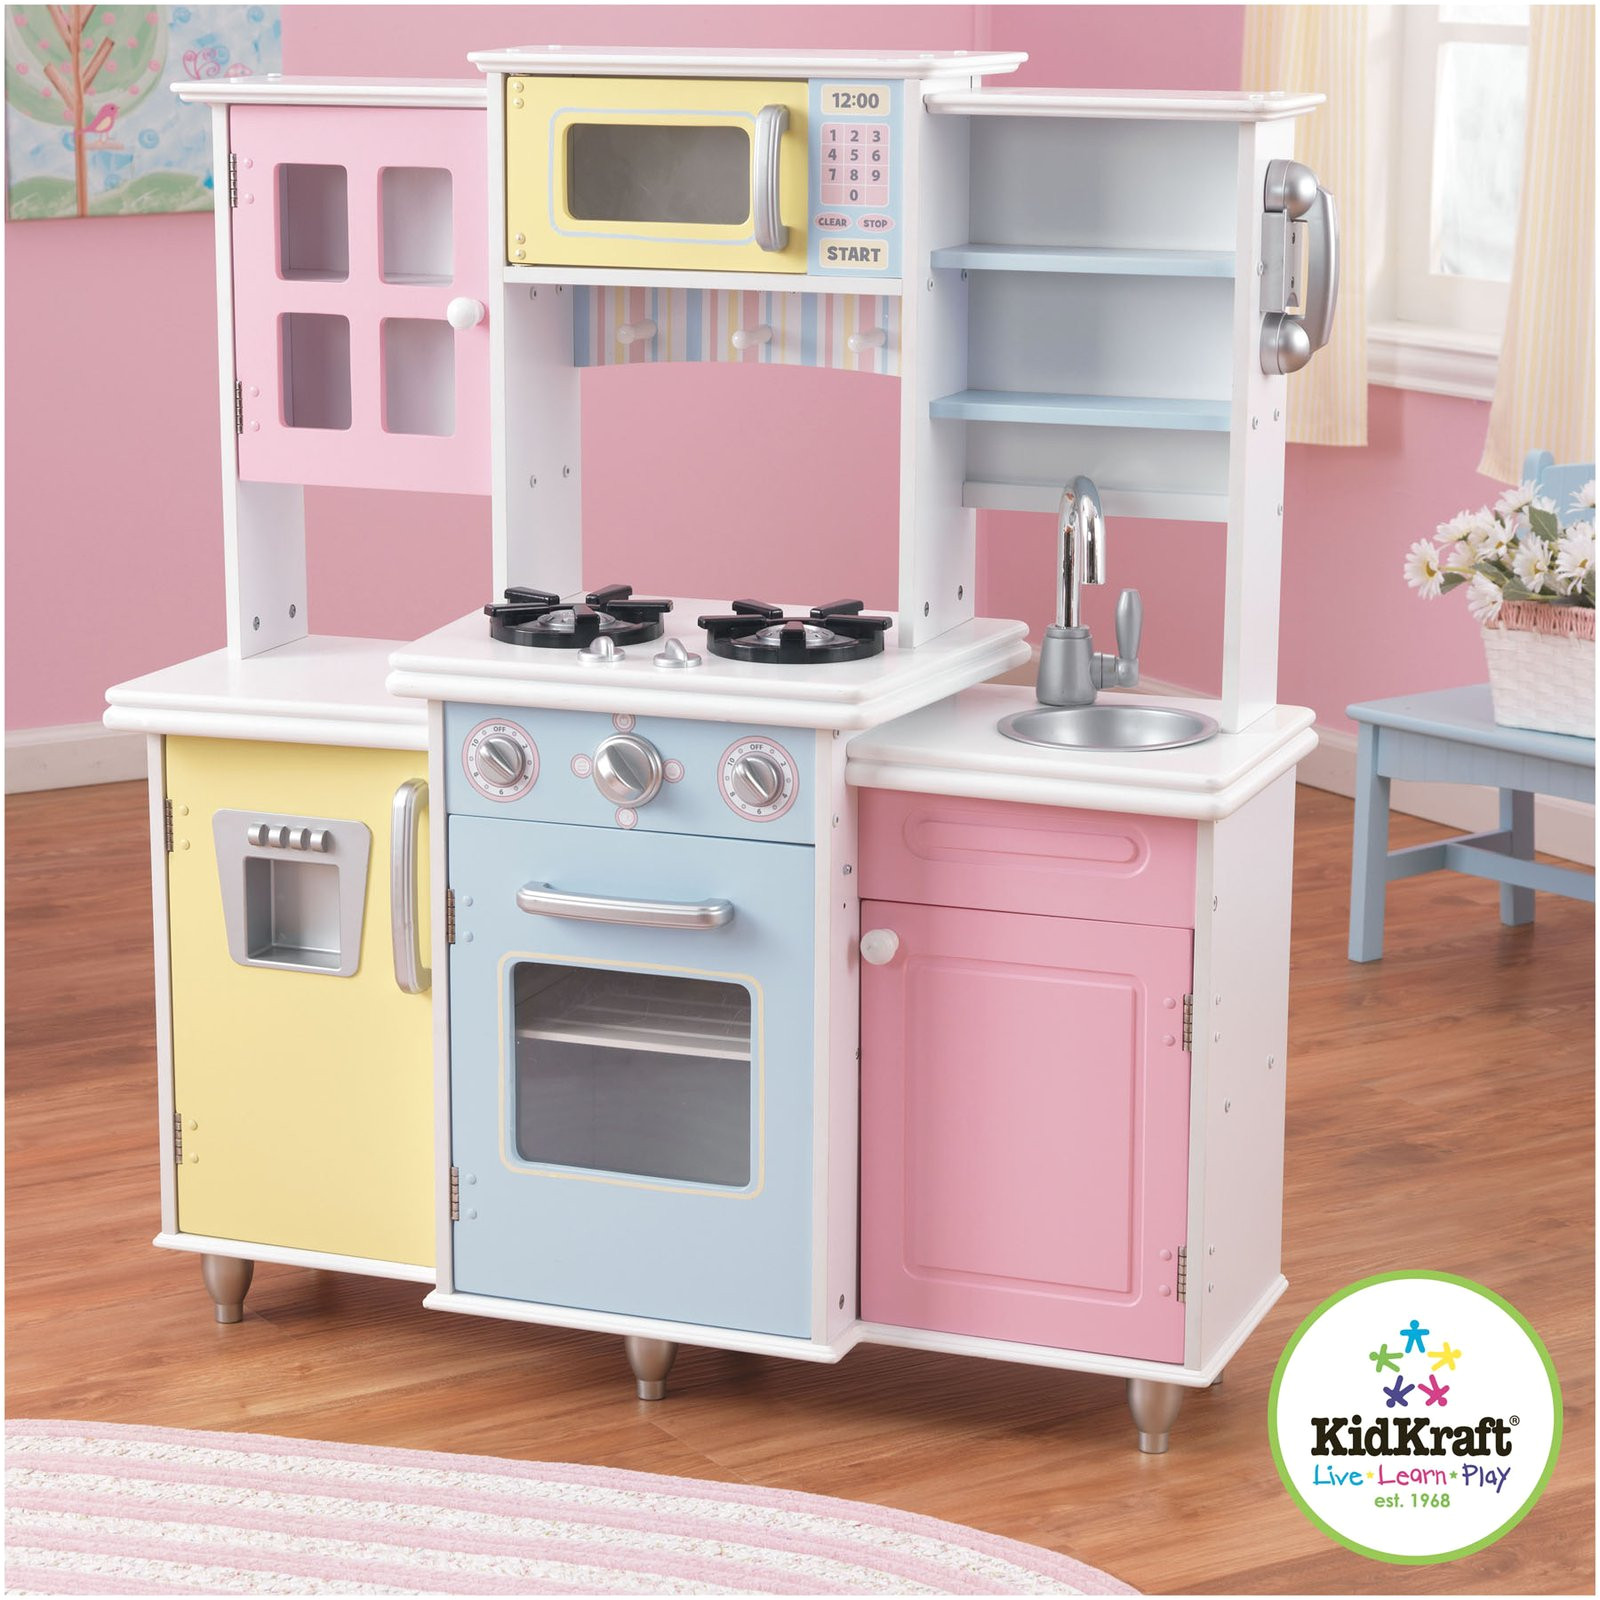 fascinating imaginarium all in one wooden kitchen set in tips get creative your child with wooden